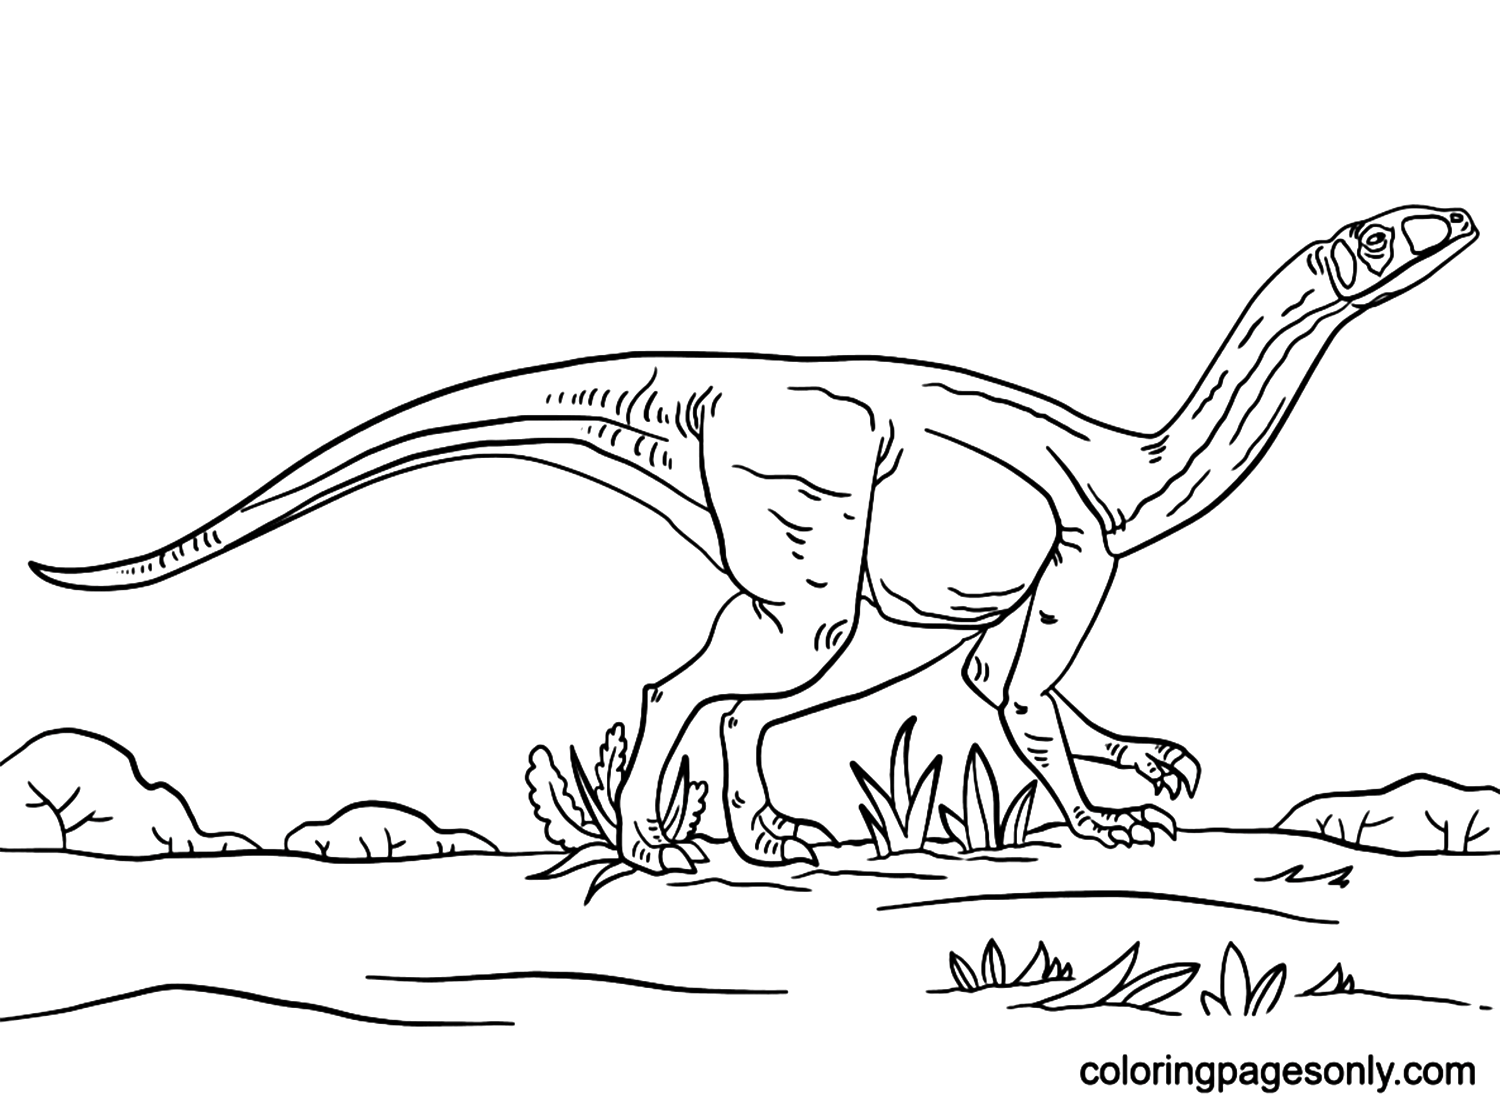 Jurassic Park Mussaurus Coloring Pages